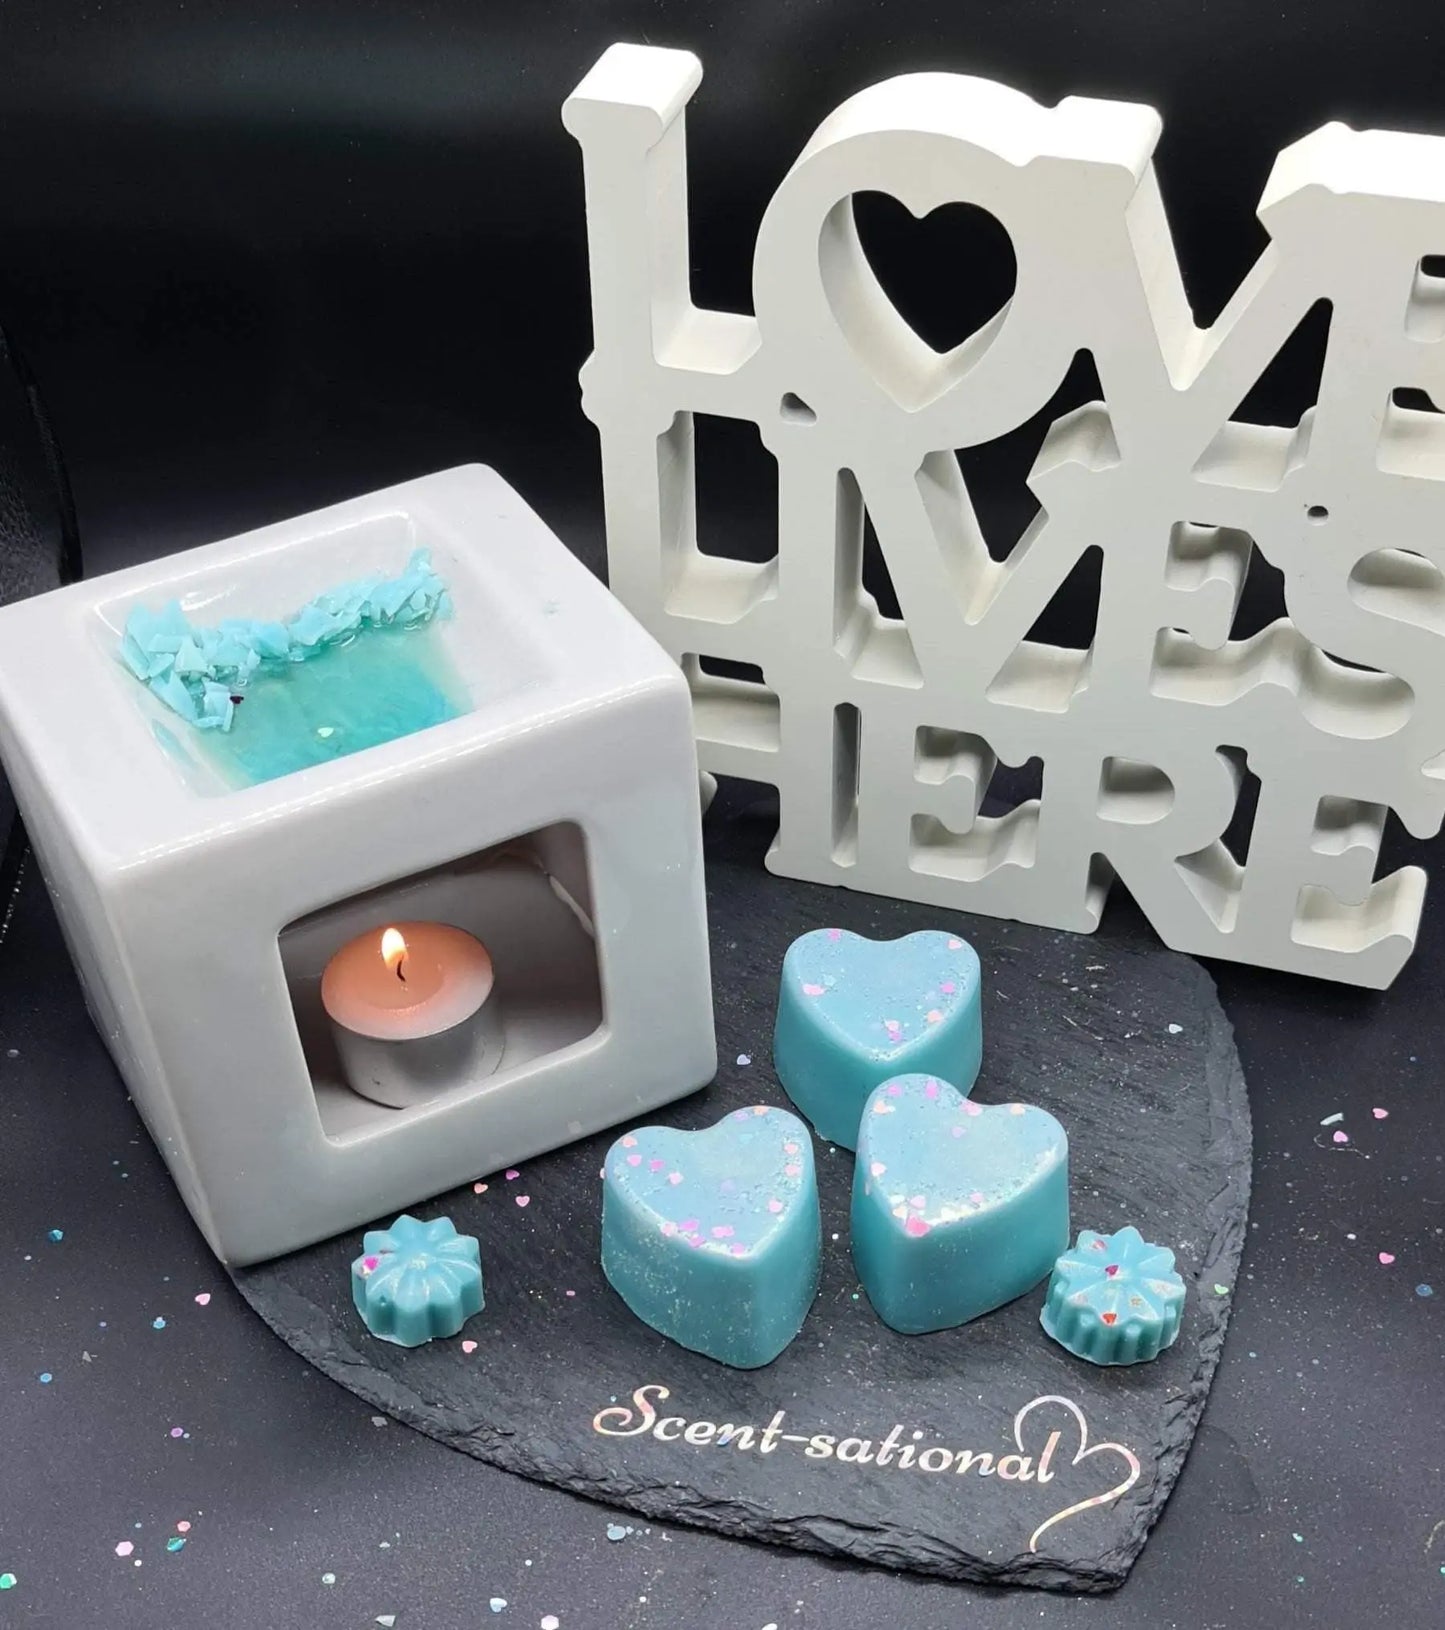 A Thousand Wishes Wax Melts Scent Sational Wax melts